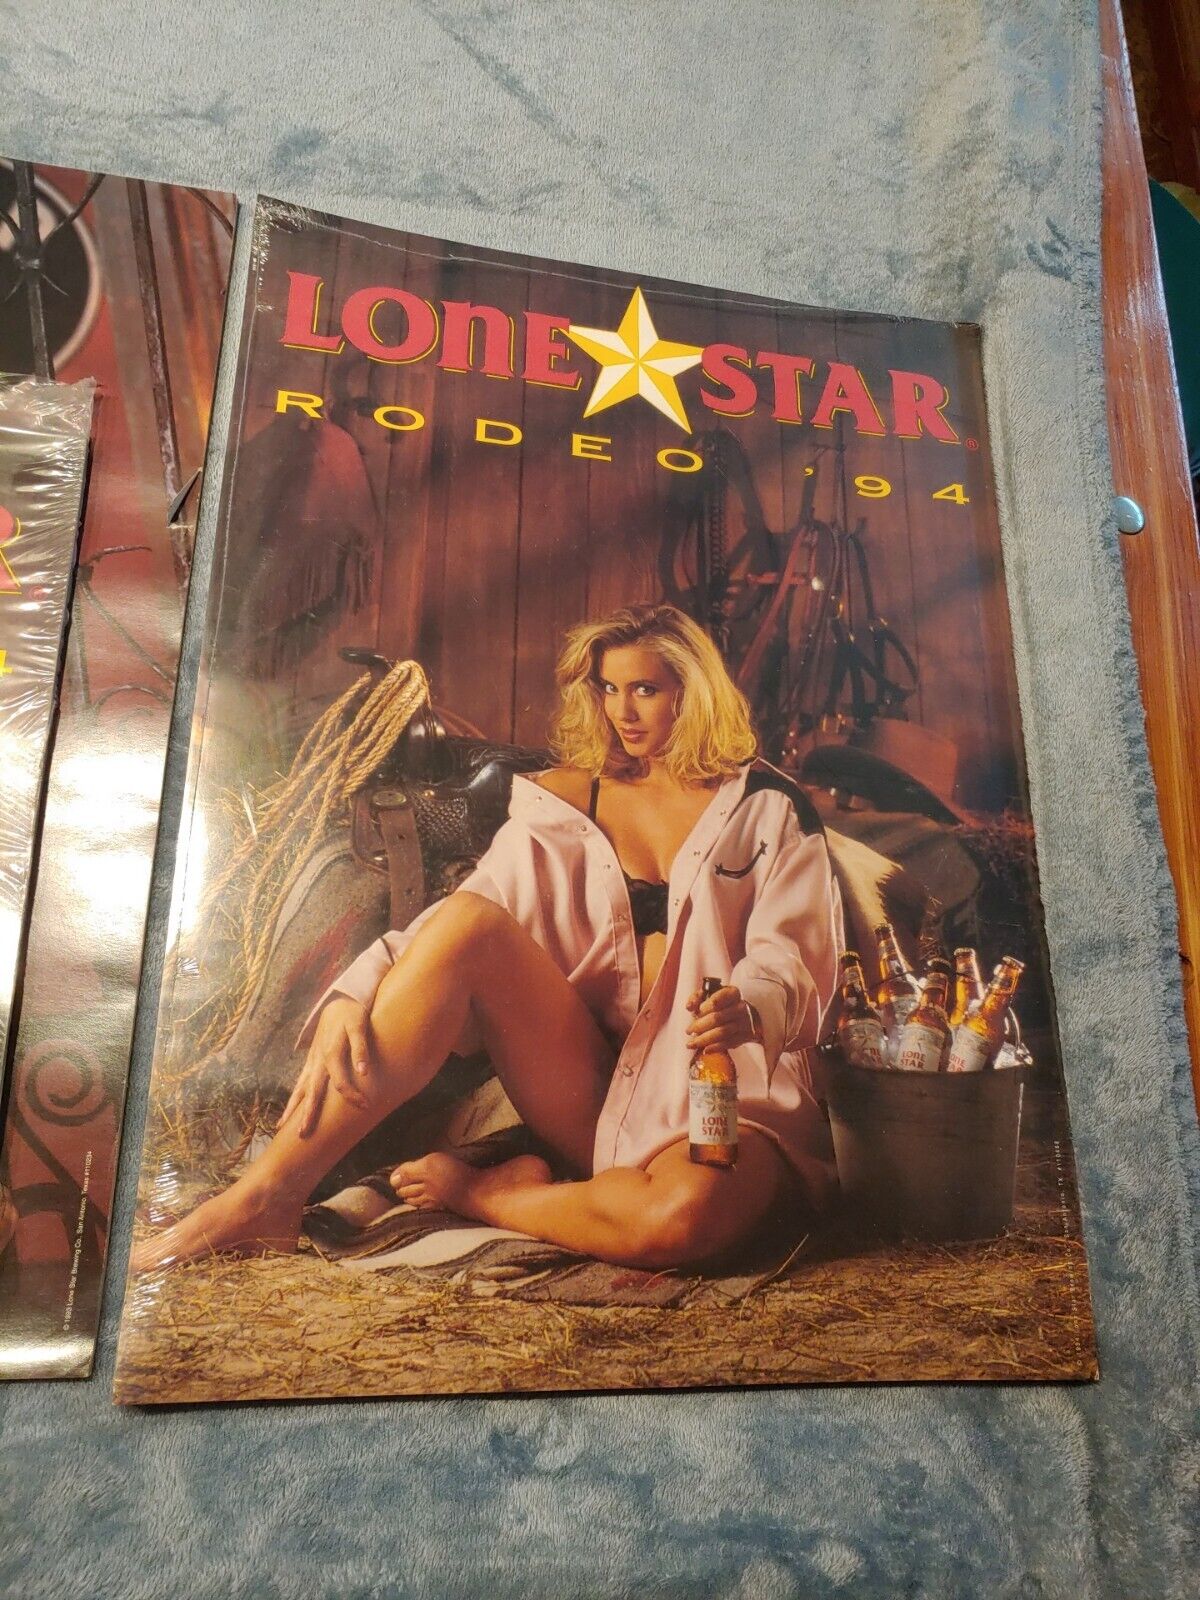 1994 Lone Star Beer SEXY GIRL RODEO POSTER San Antonio, Texas